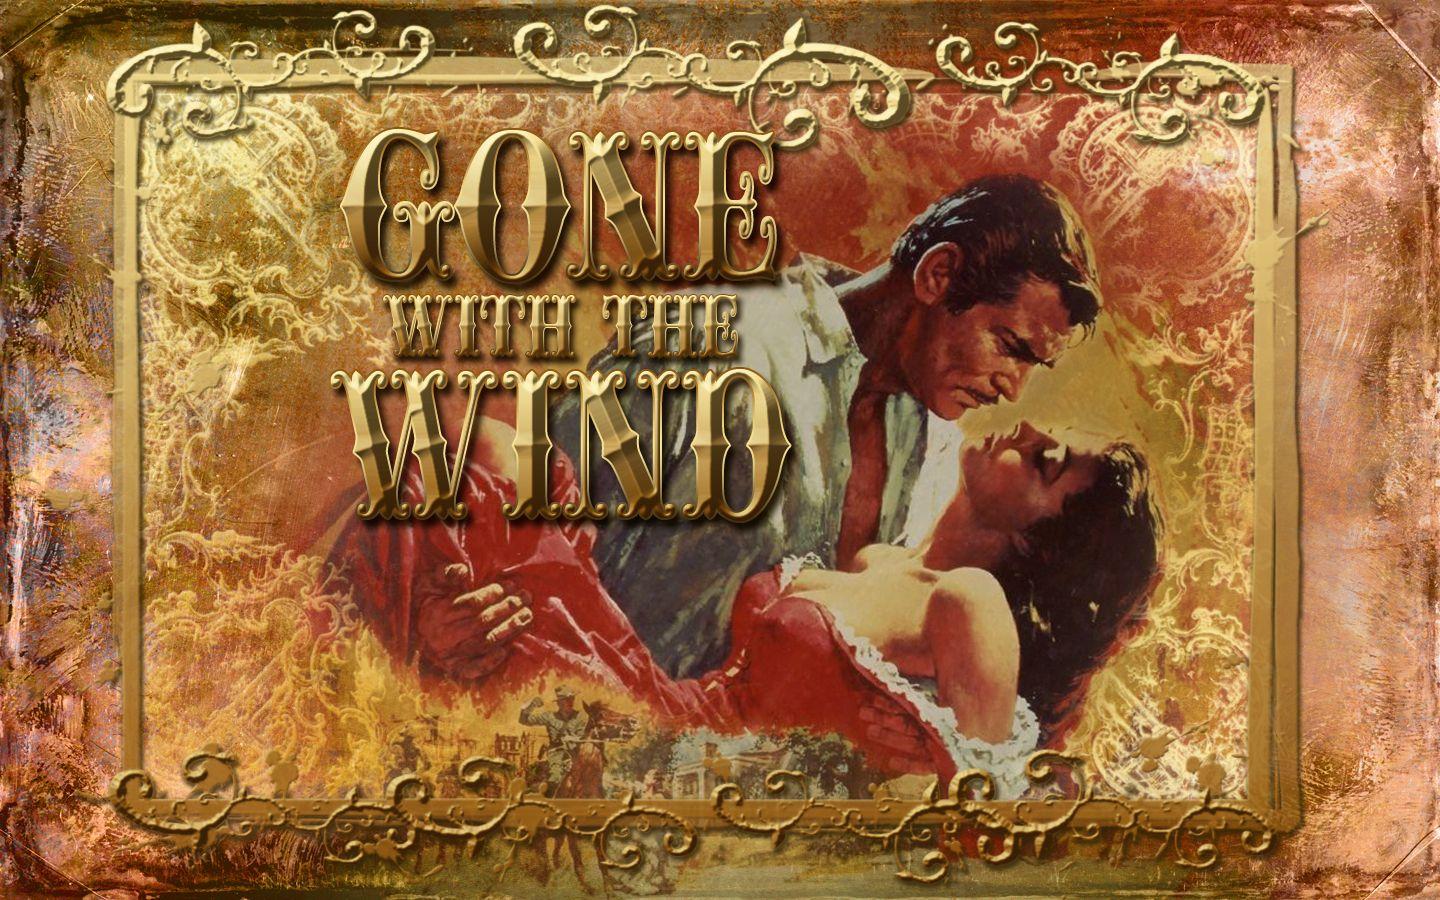 Movie Gone With The Wind wallpaper Desktop, Phone, Tablet